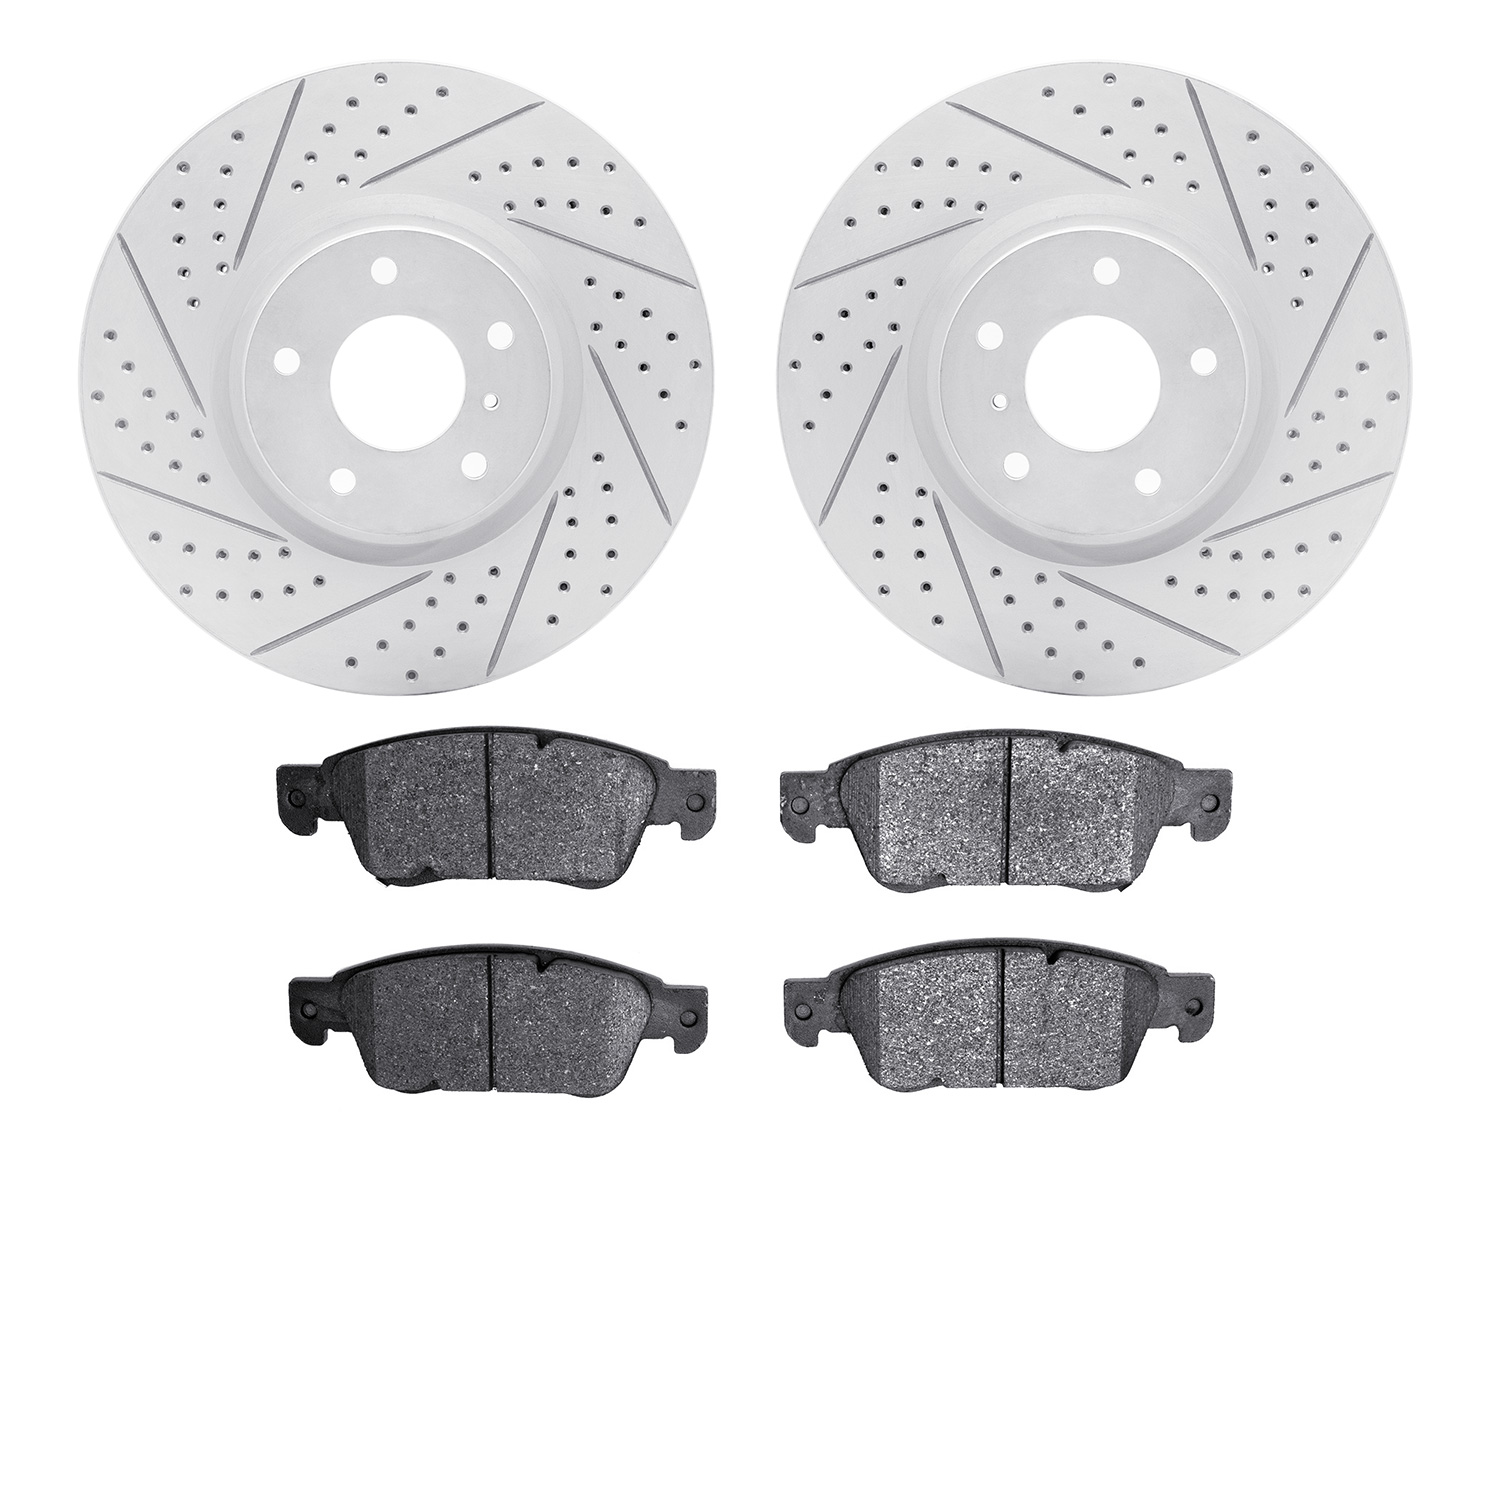 2502-68007 Geoperformance Drilled/Slotted Rotors w/5000 Advanced Brake Pads Kit, 2007-2015 Infiniti/Nissan, Position: Front